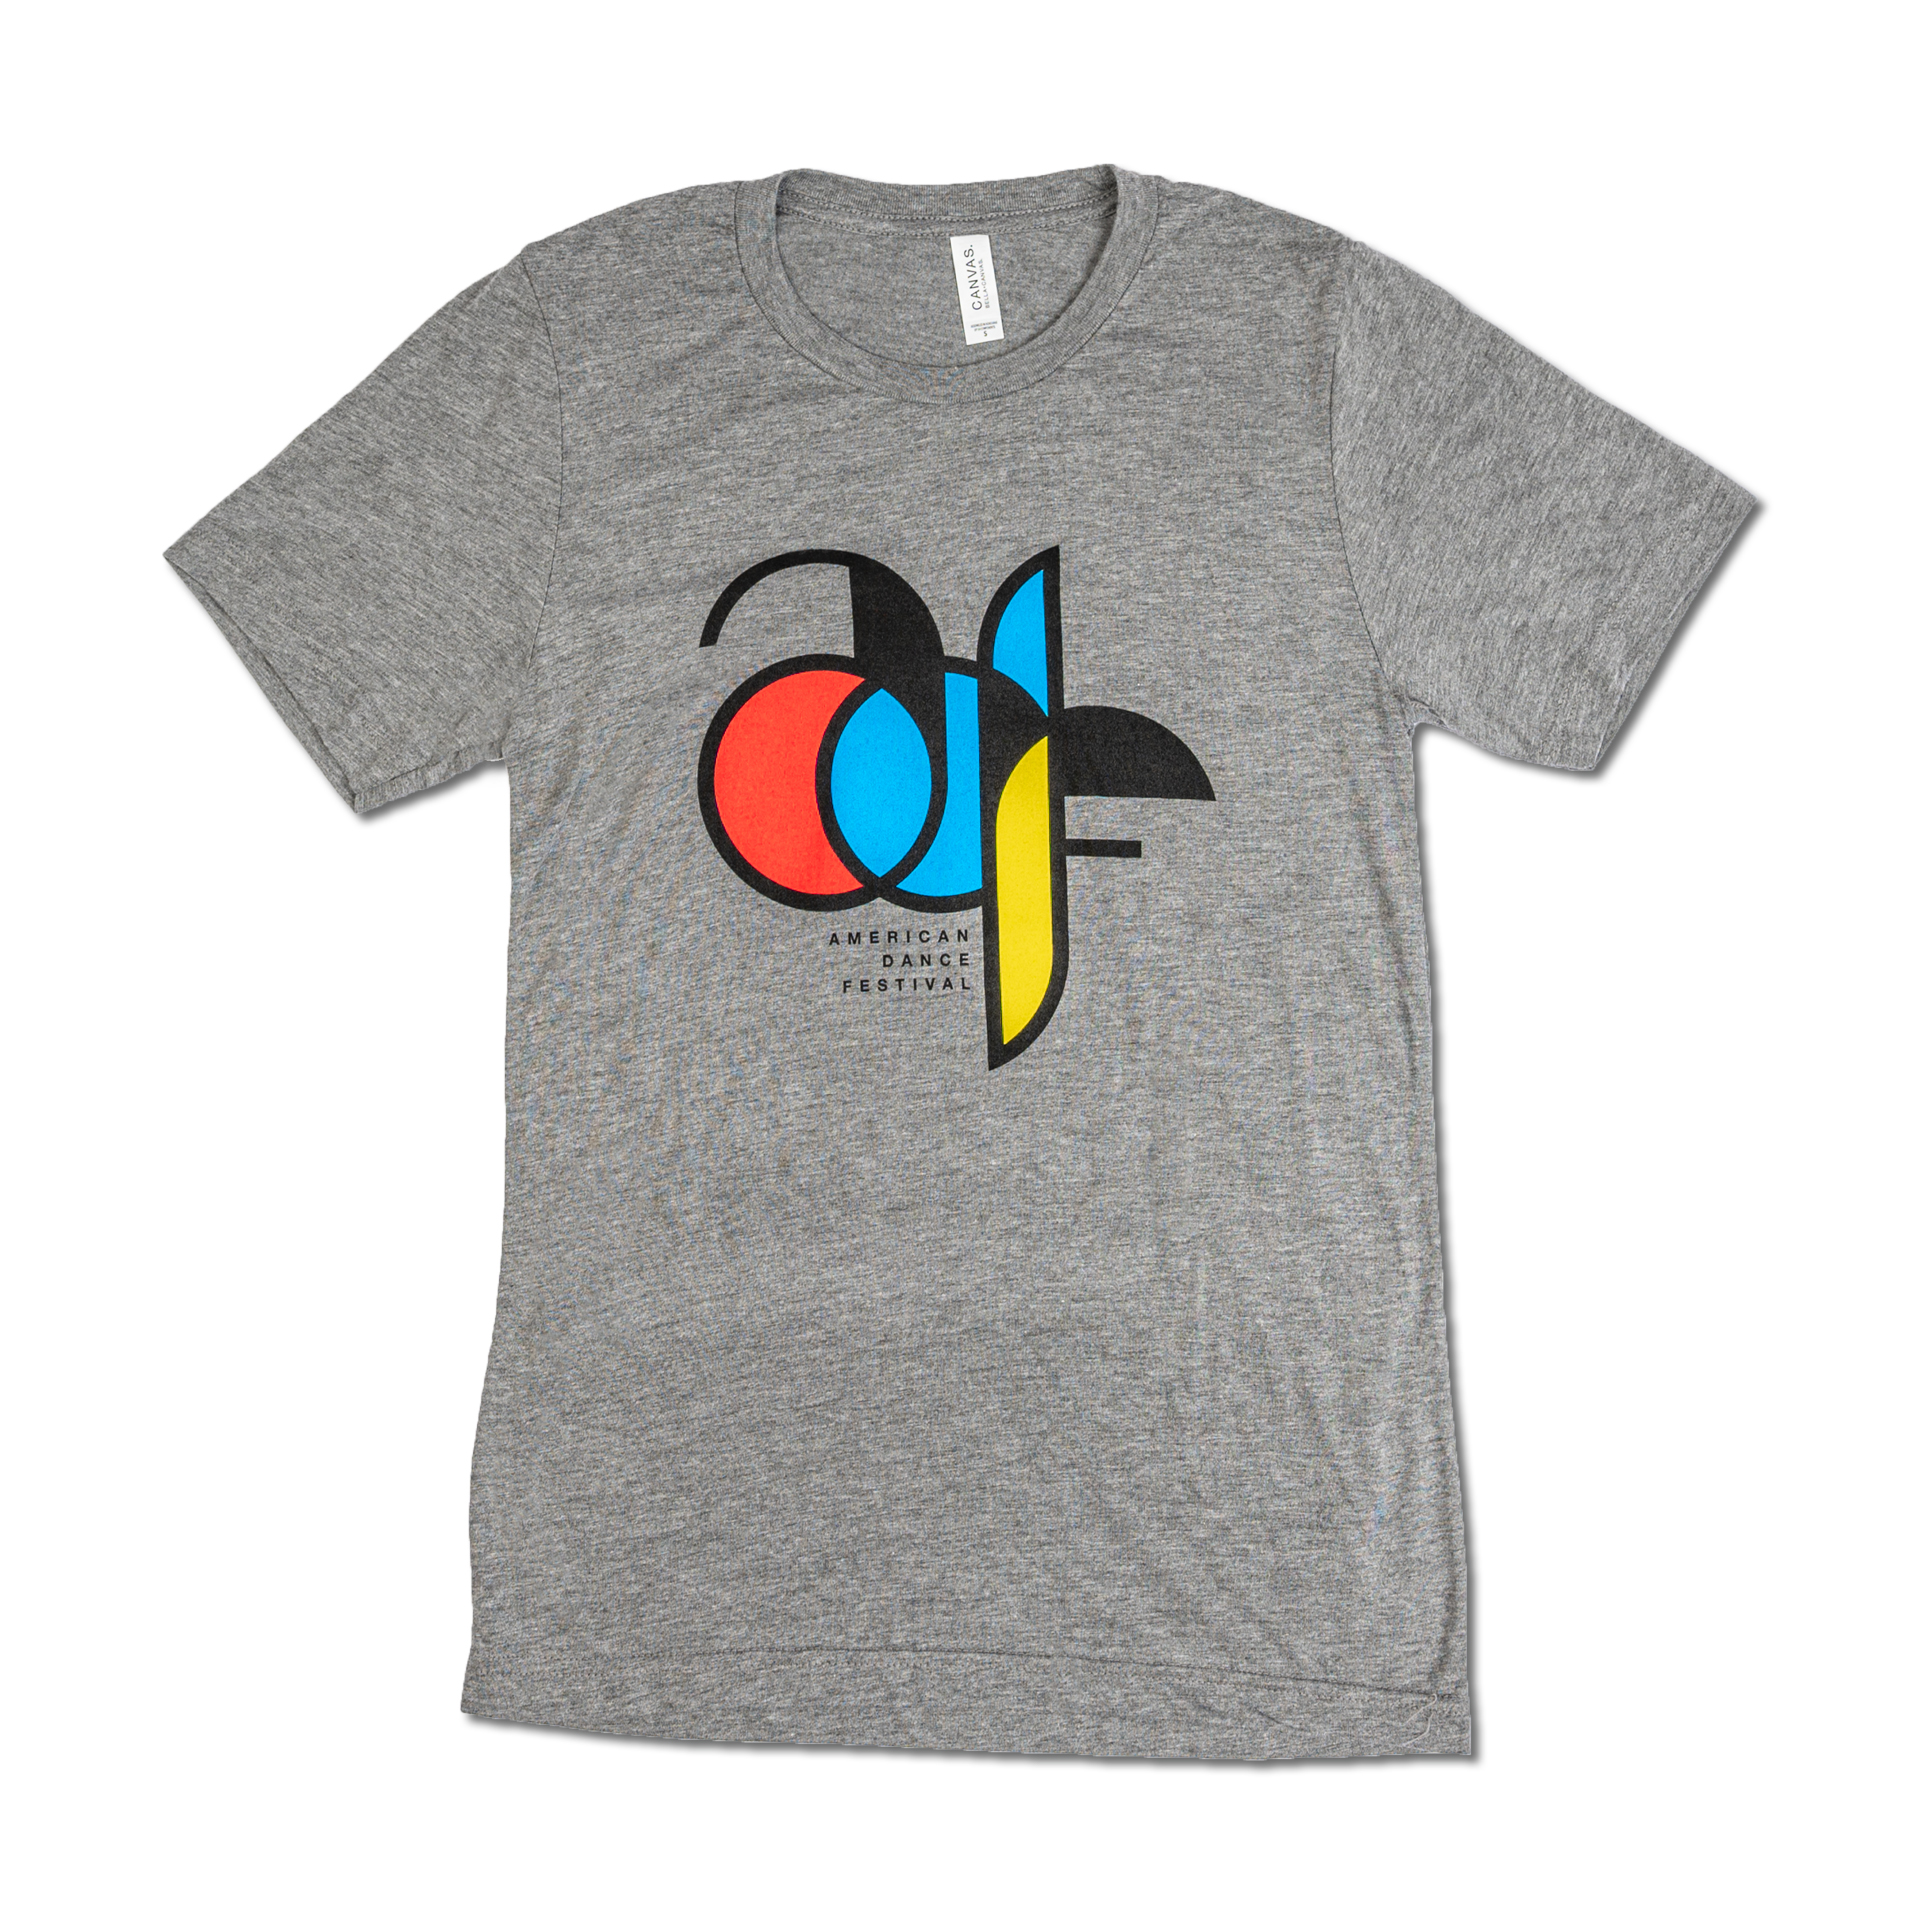 Grey shirt with a stylized black, red, blue, and yellow ADF